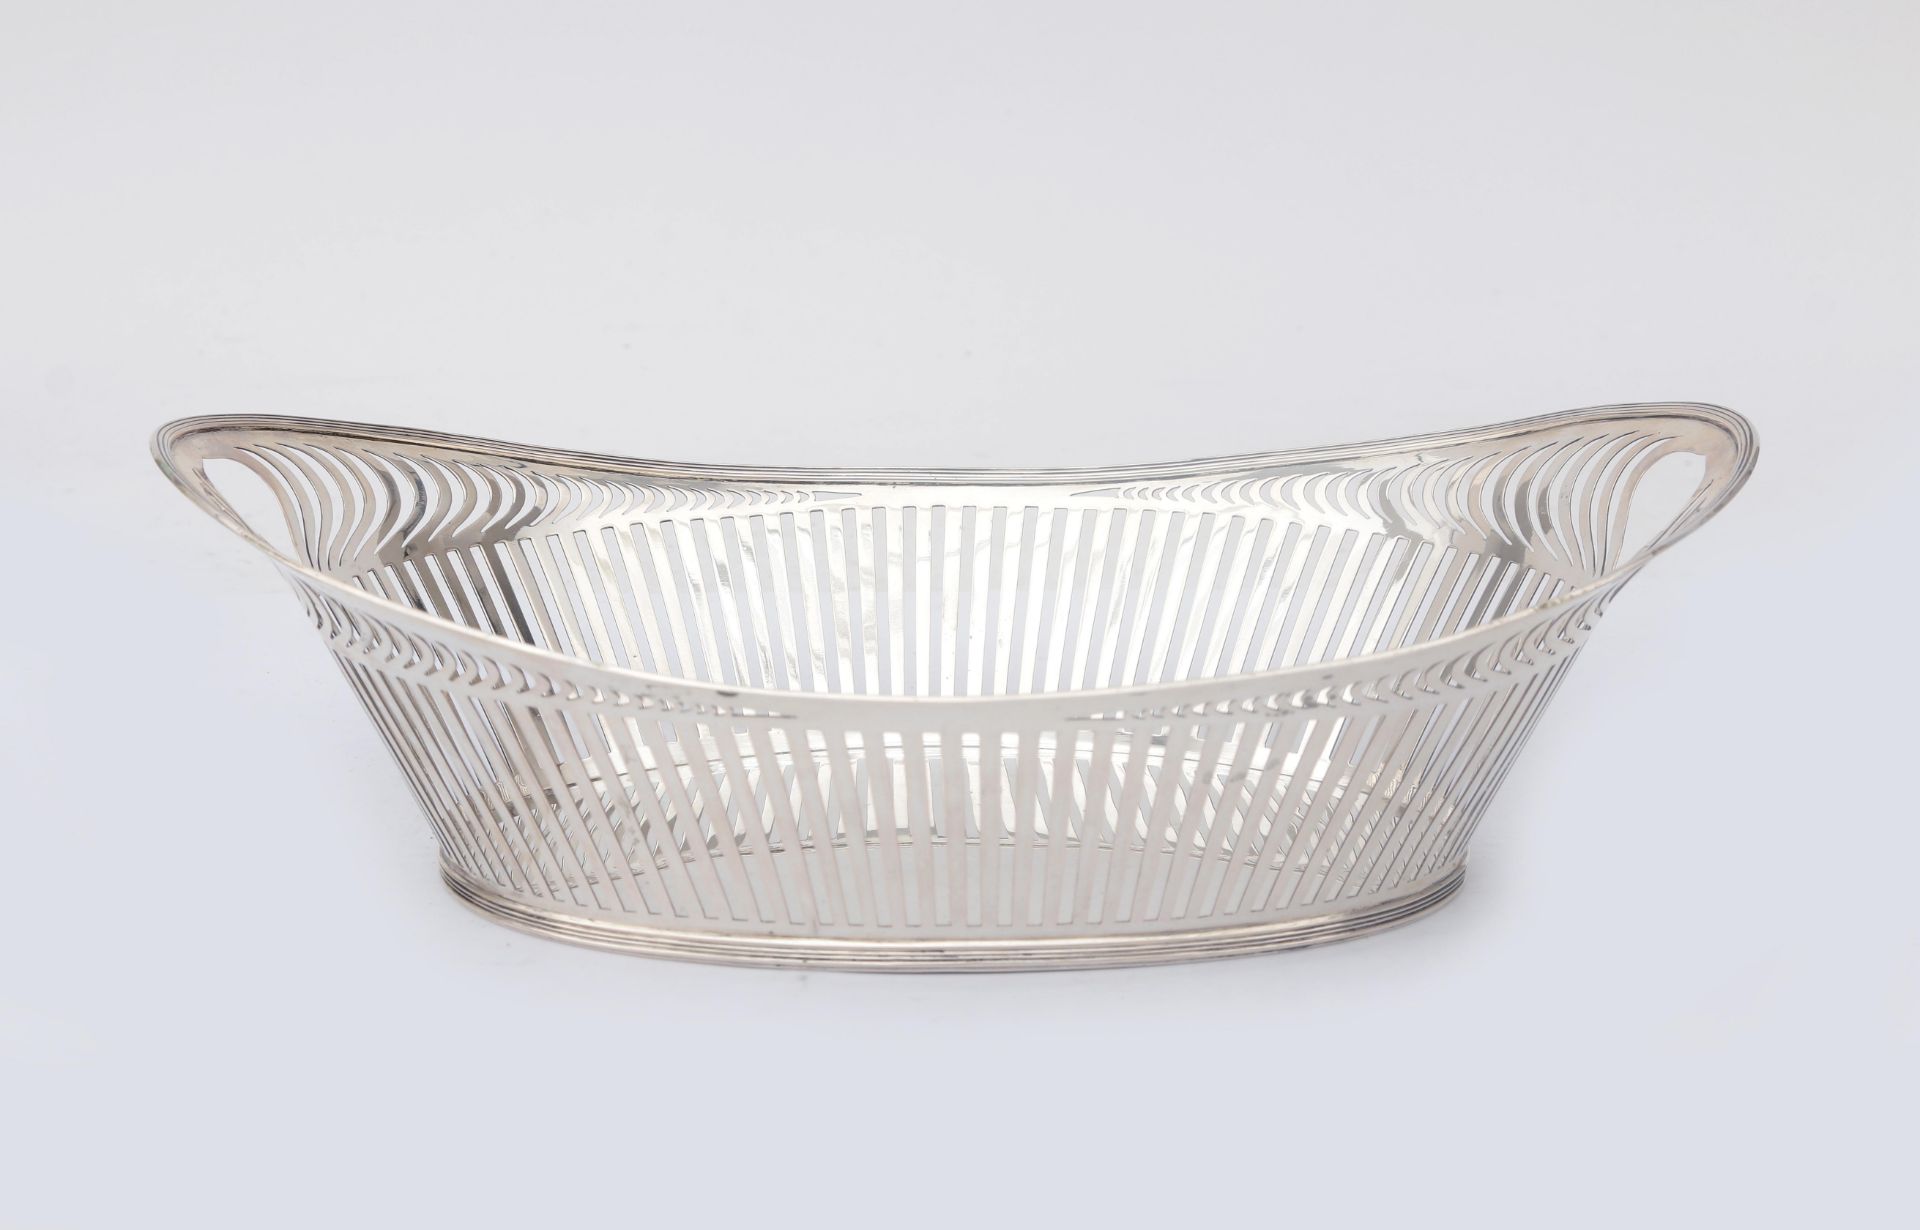 A Dutch ajour sawn 2nd grade silver art deco bread basket, with fillet edge resting on a base ring